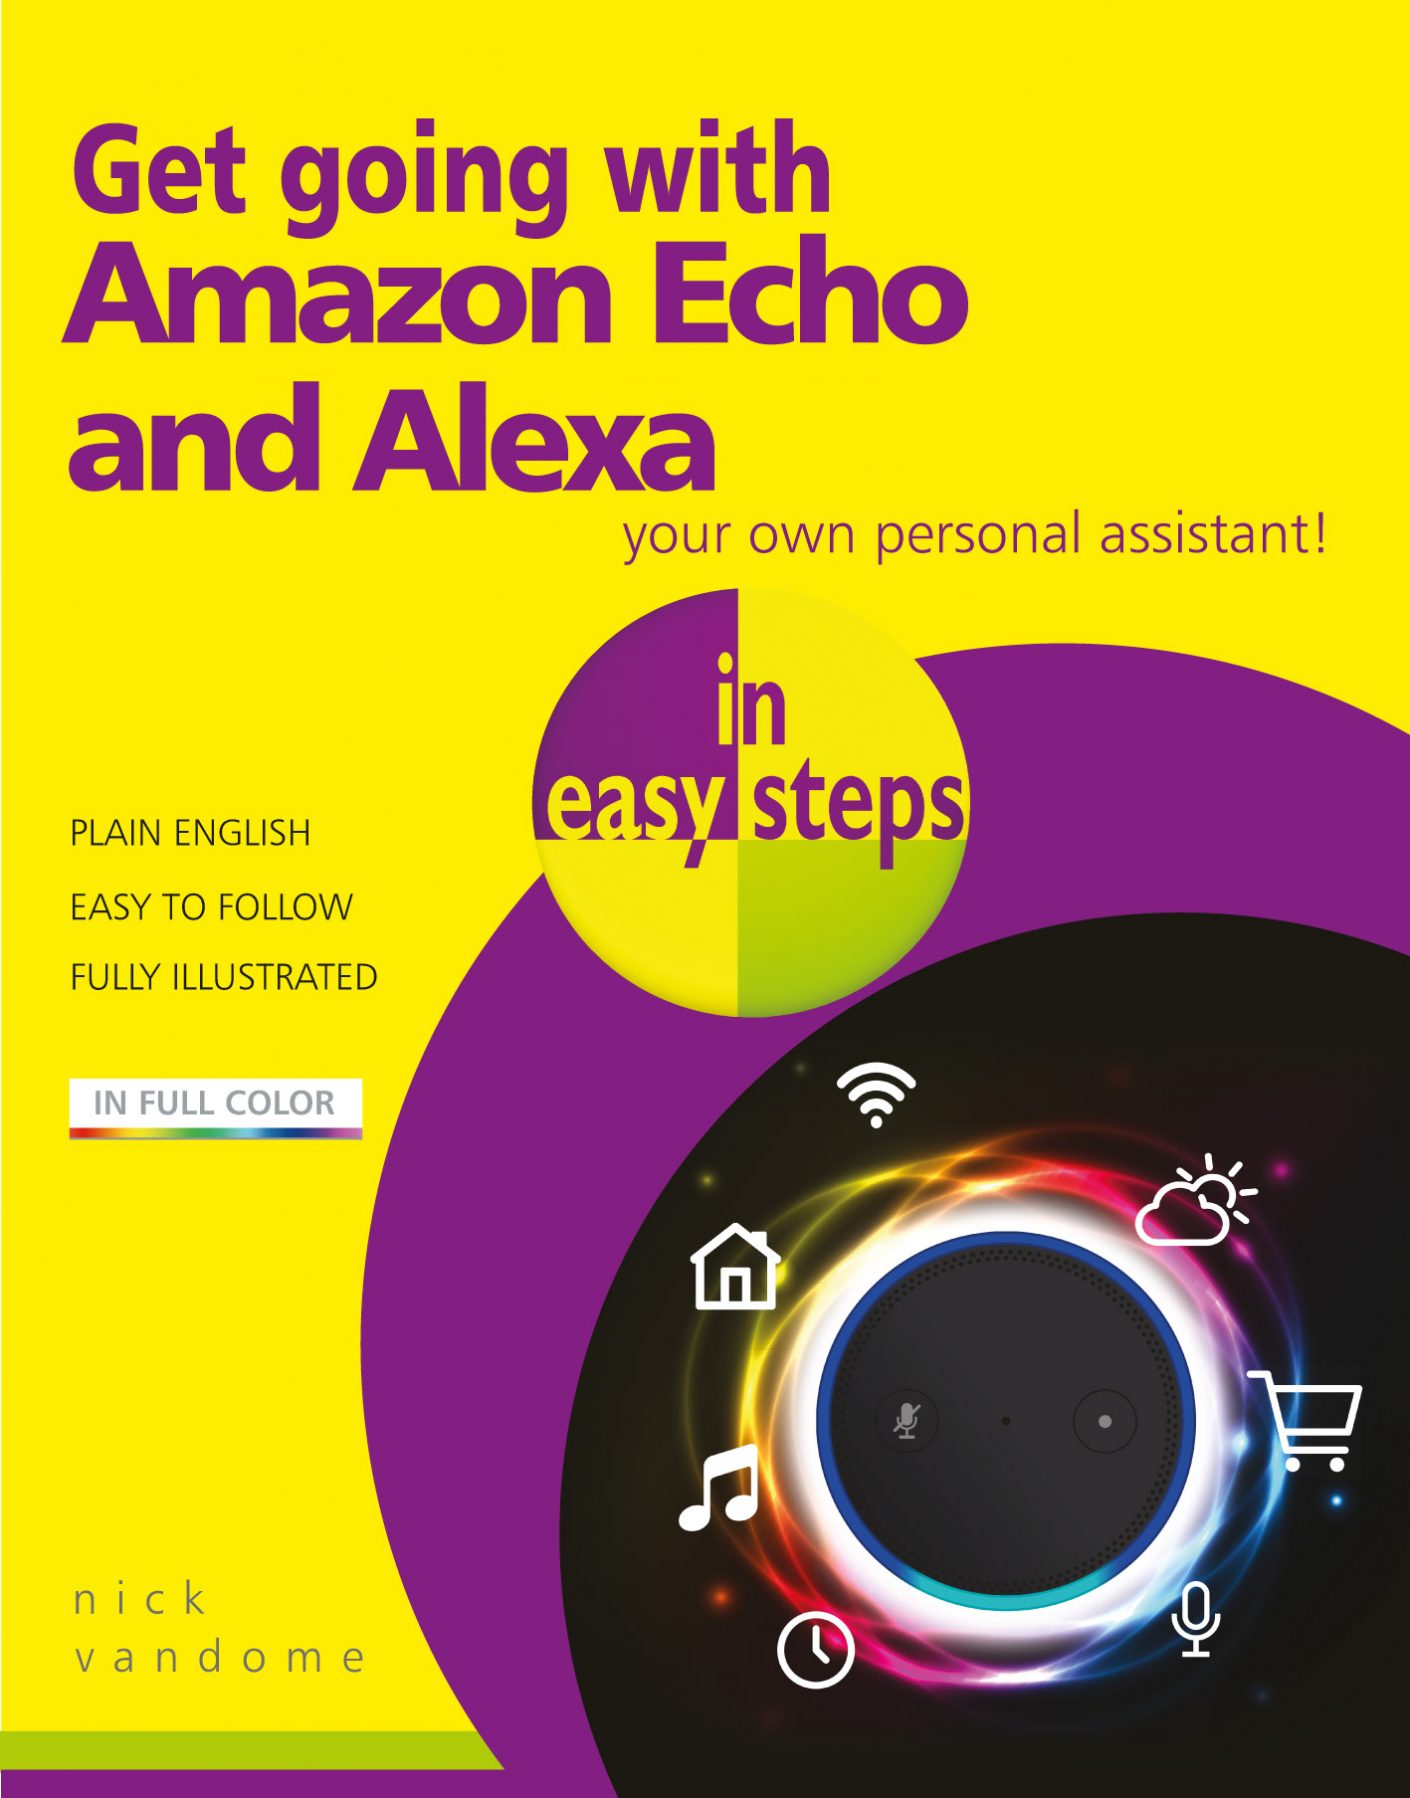 Get going with Amazon Echo